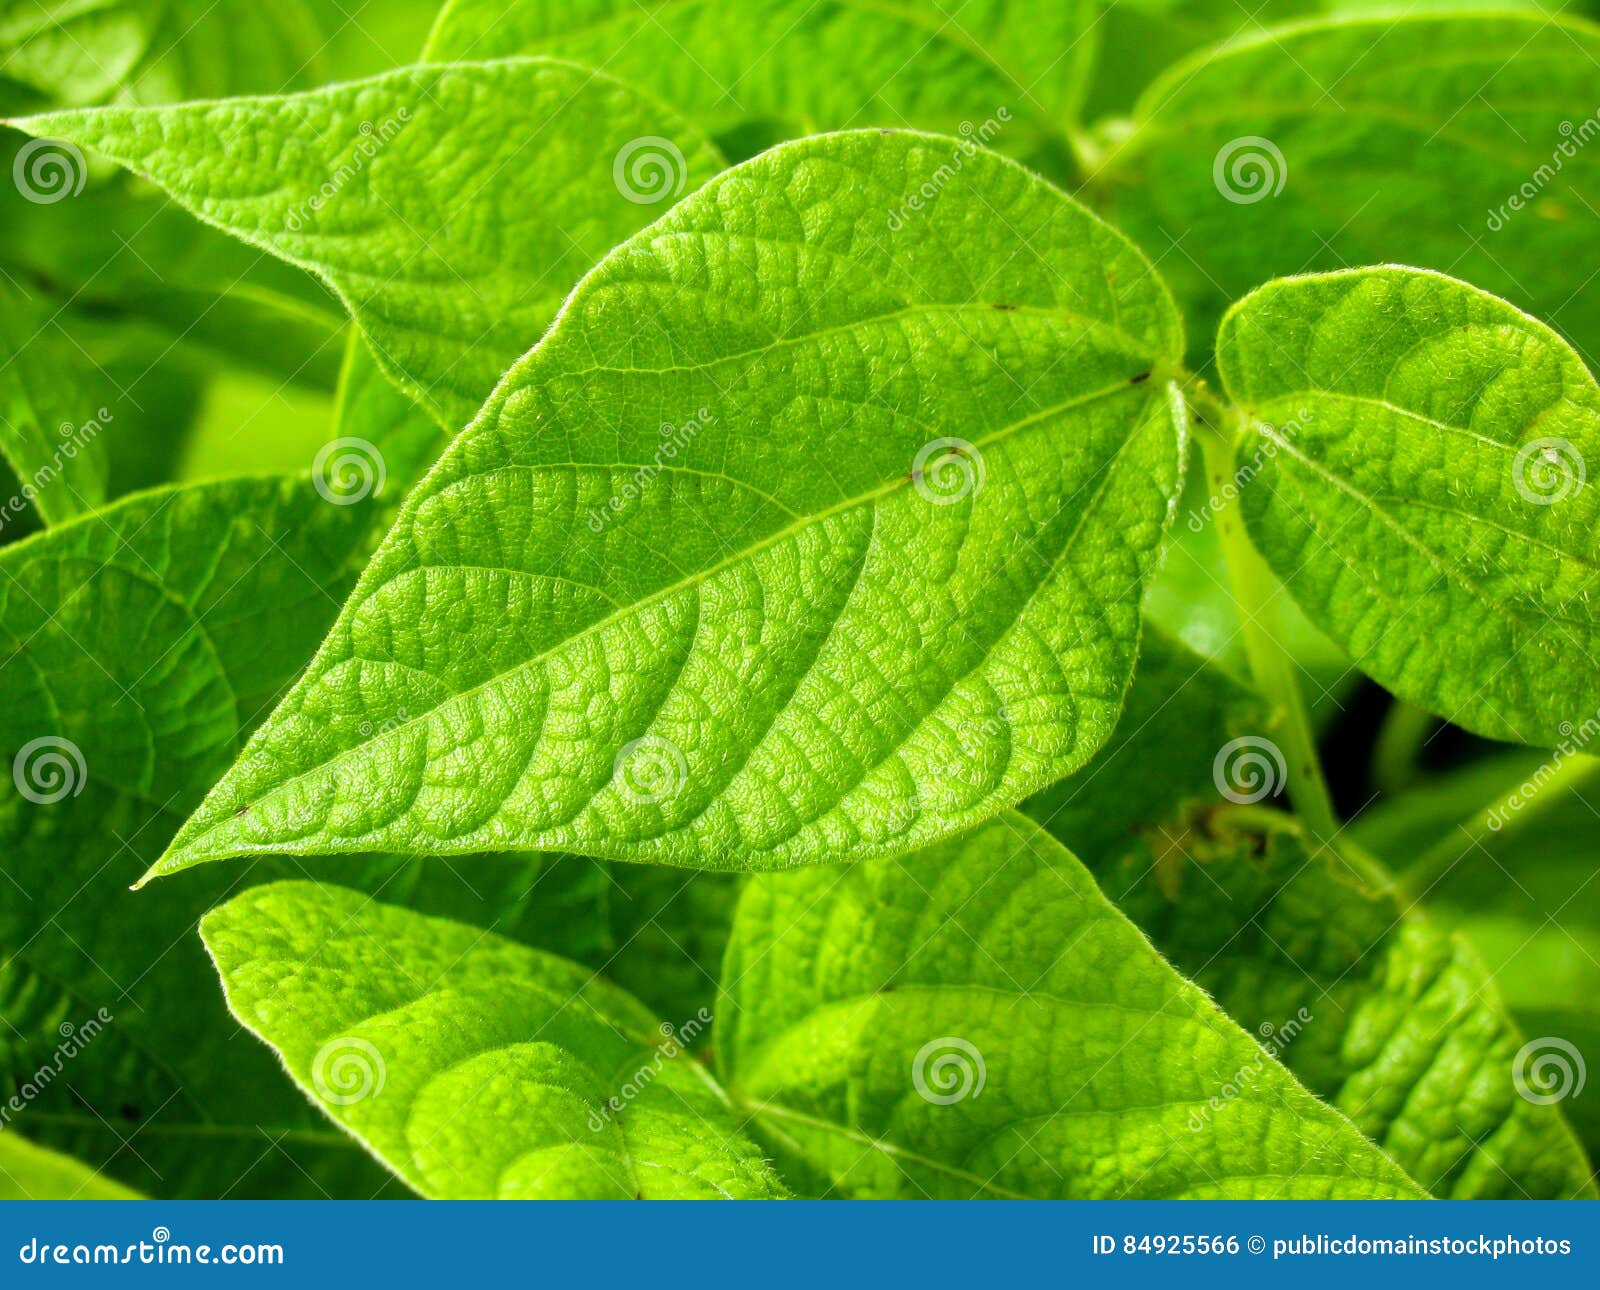 Green Plant Leaves Picture Image 84925566